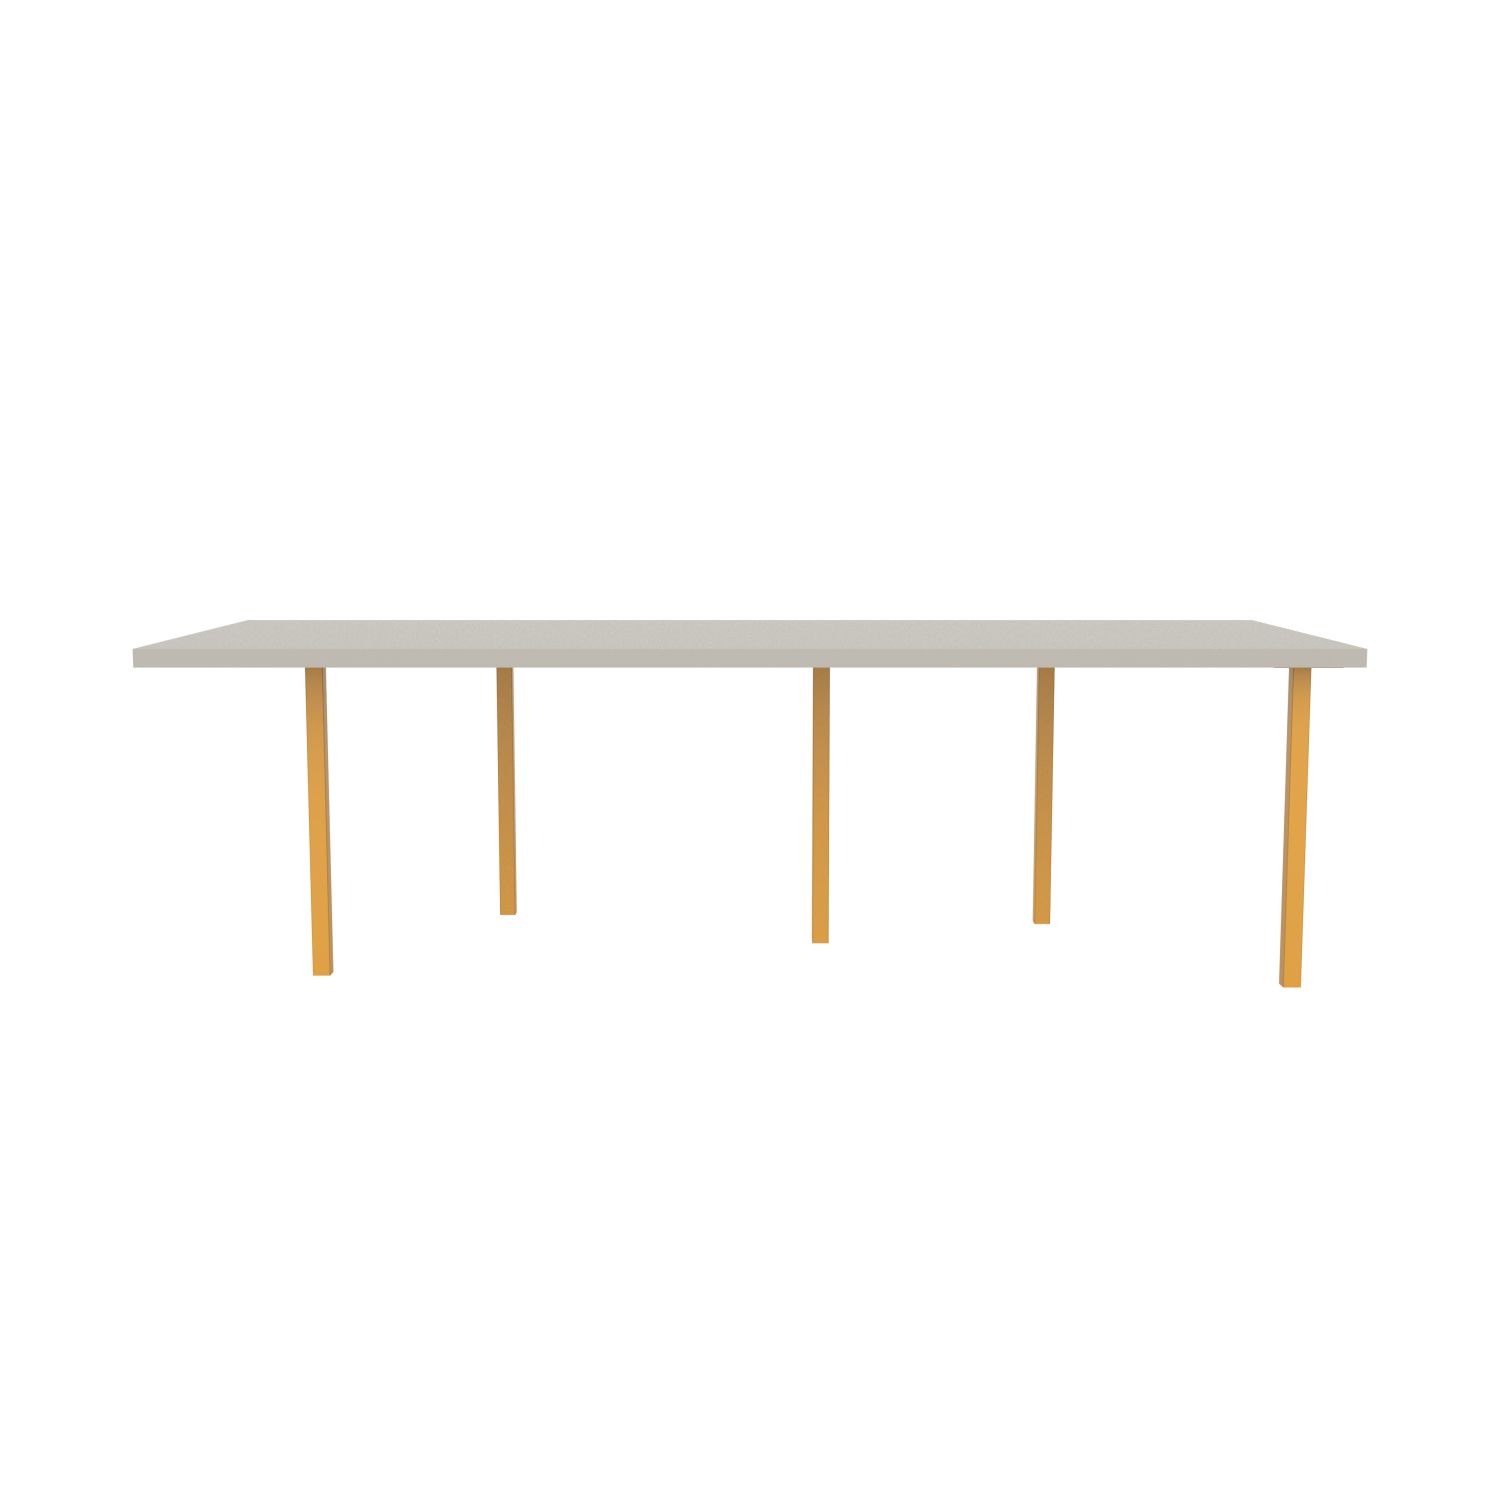 lensvelt bbrand table five fixed heigt 103x264 hpl white 50 mm price level 1 yellow ral1004